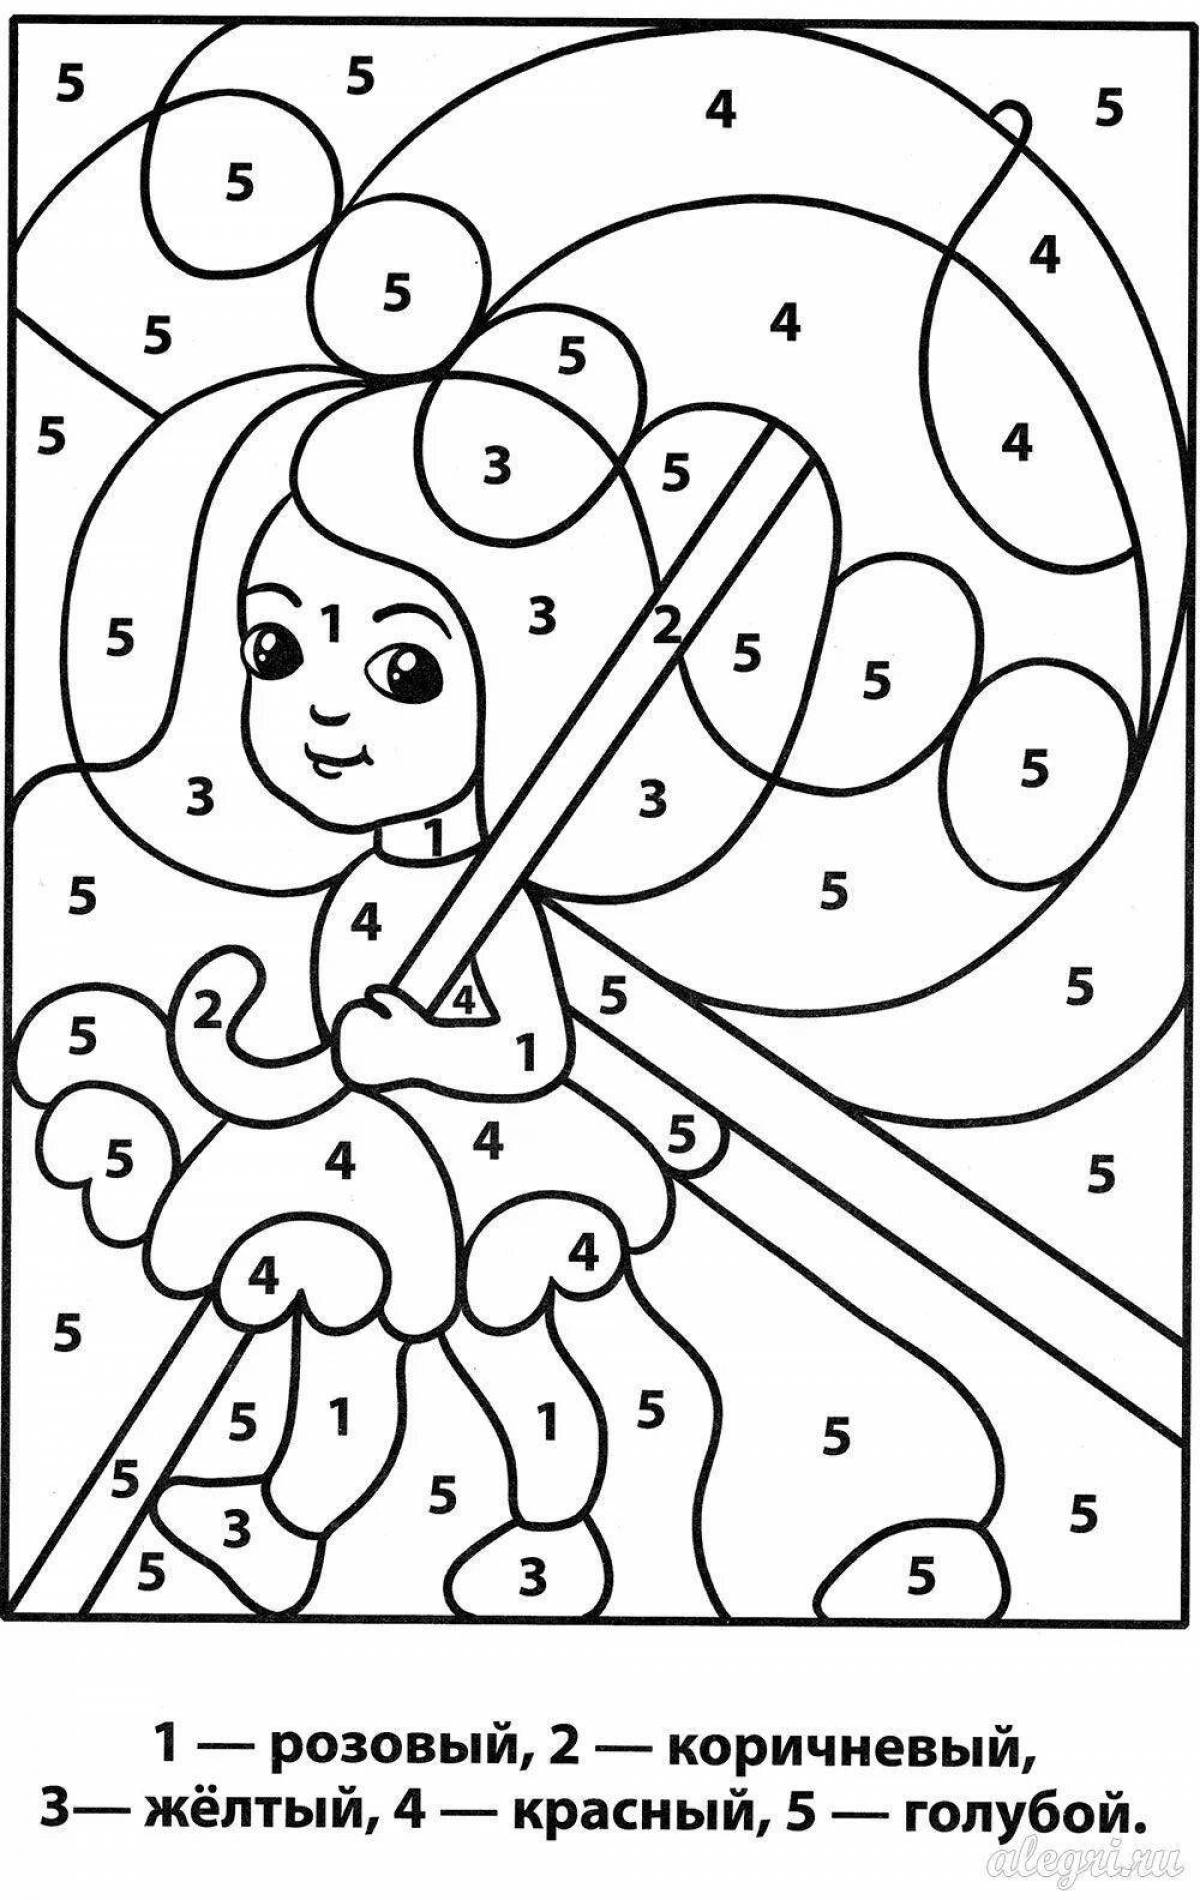 Crazy coloring book for girls 6-7 years old